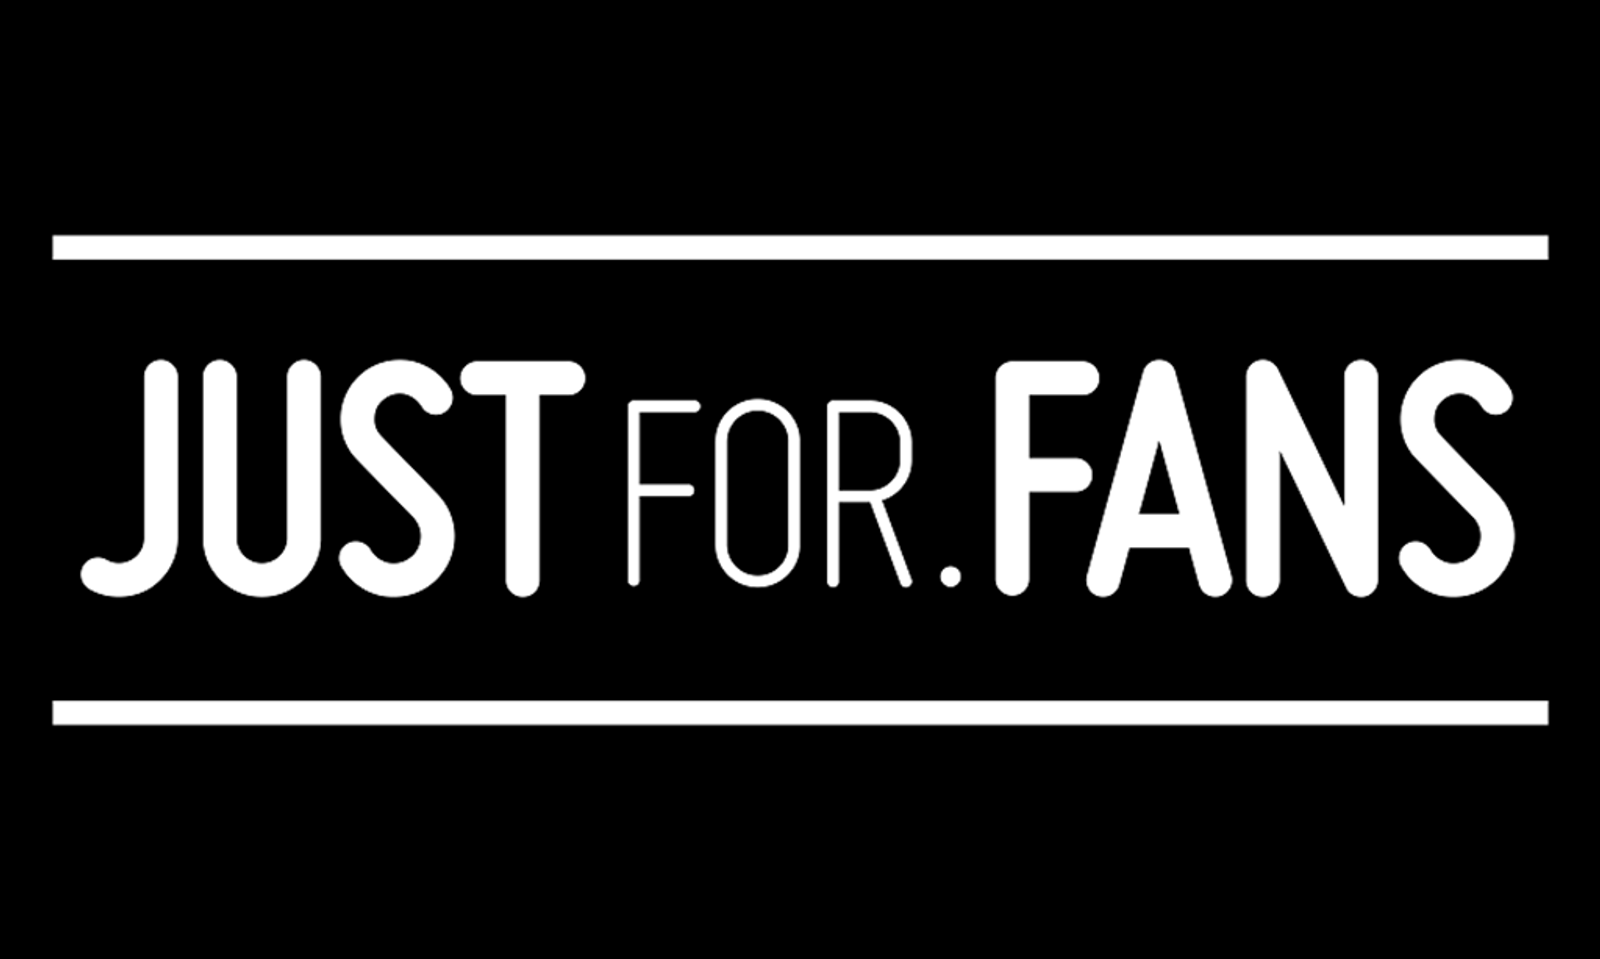 JustFor.Fans Offers Webinar With Marketing Advice on August 13